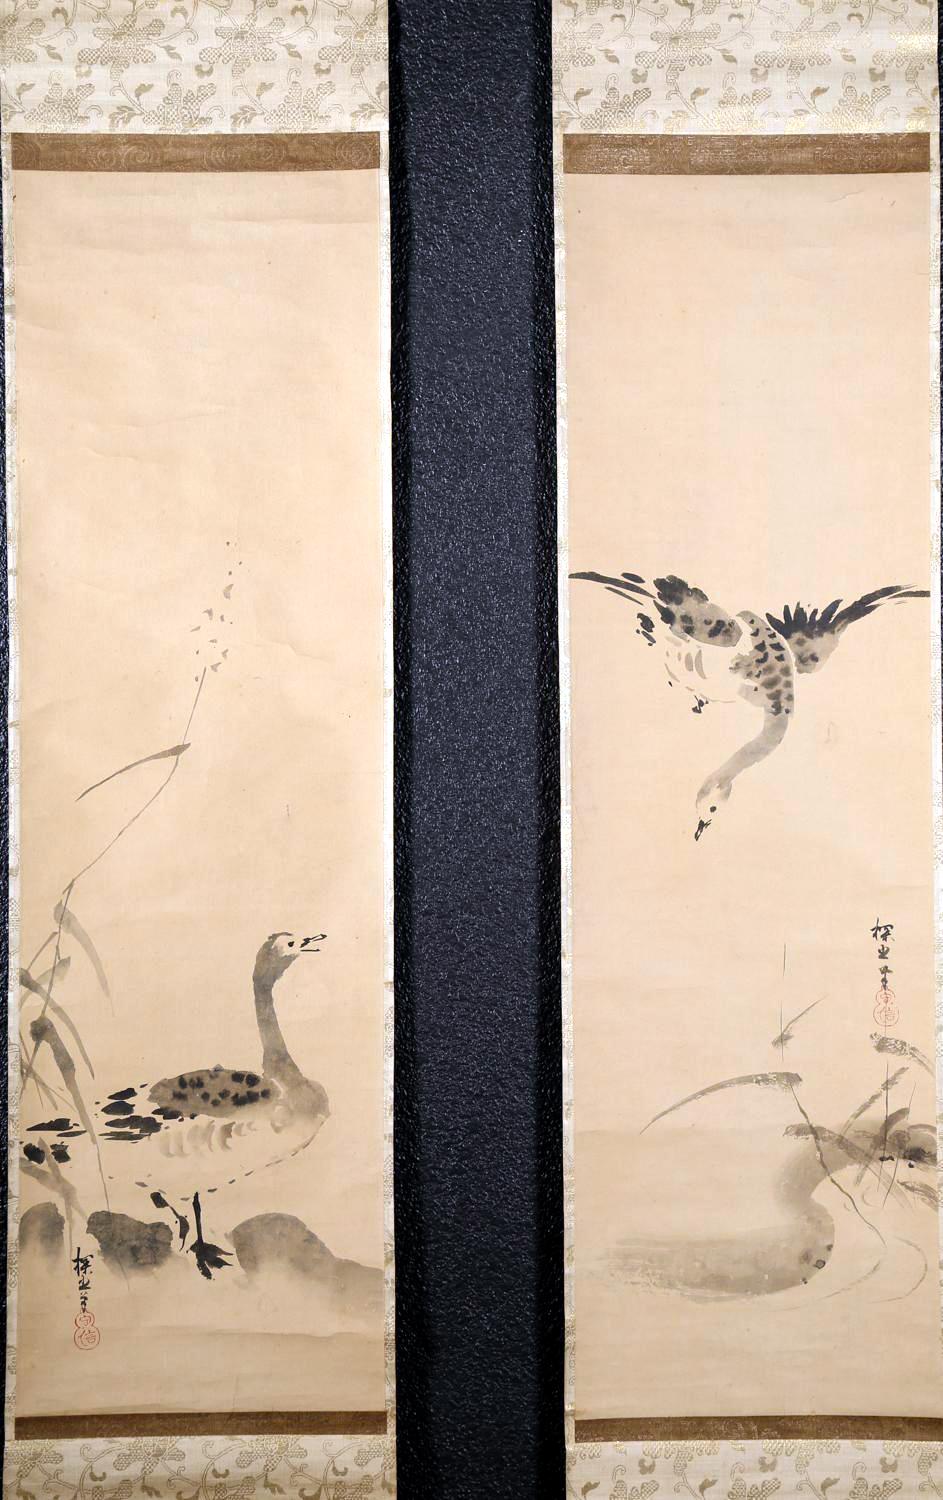 A fine matching pair of hanging scrolls ink on paper mounted in green brocade borders circa Edo period (17-18th century). The Kano school painting depicts wild geese in the reeds by the margin of water, a popular subject borrowed from the Chinese